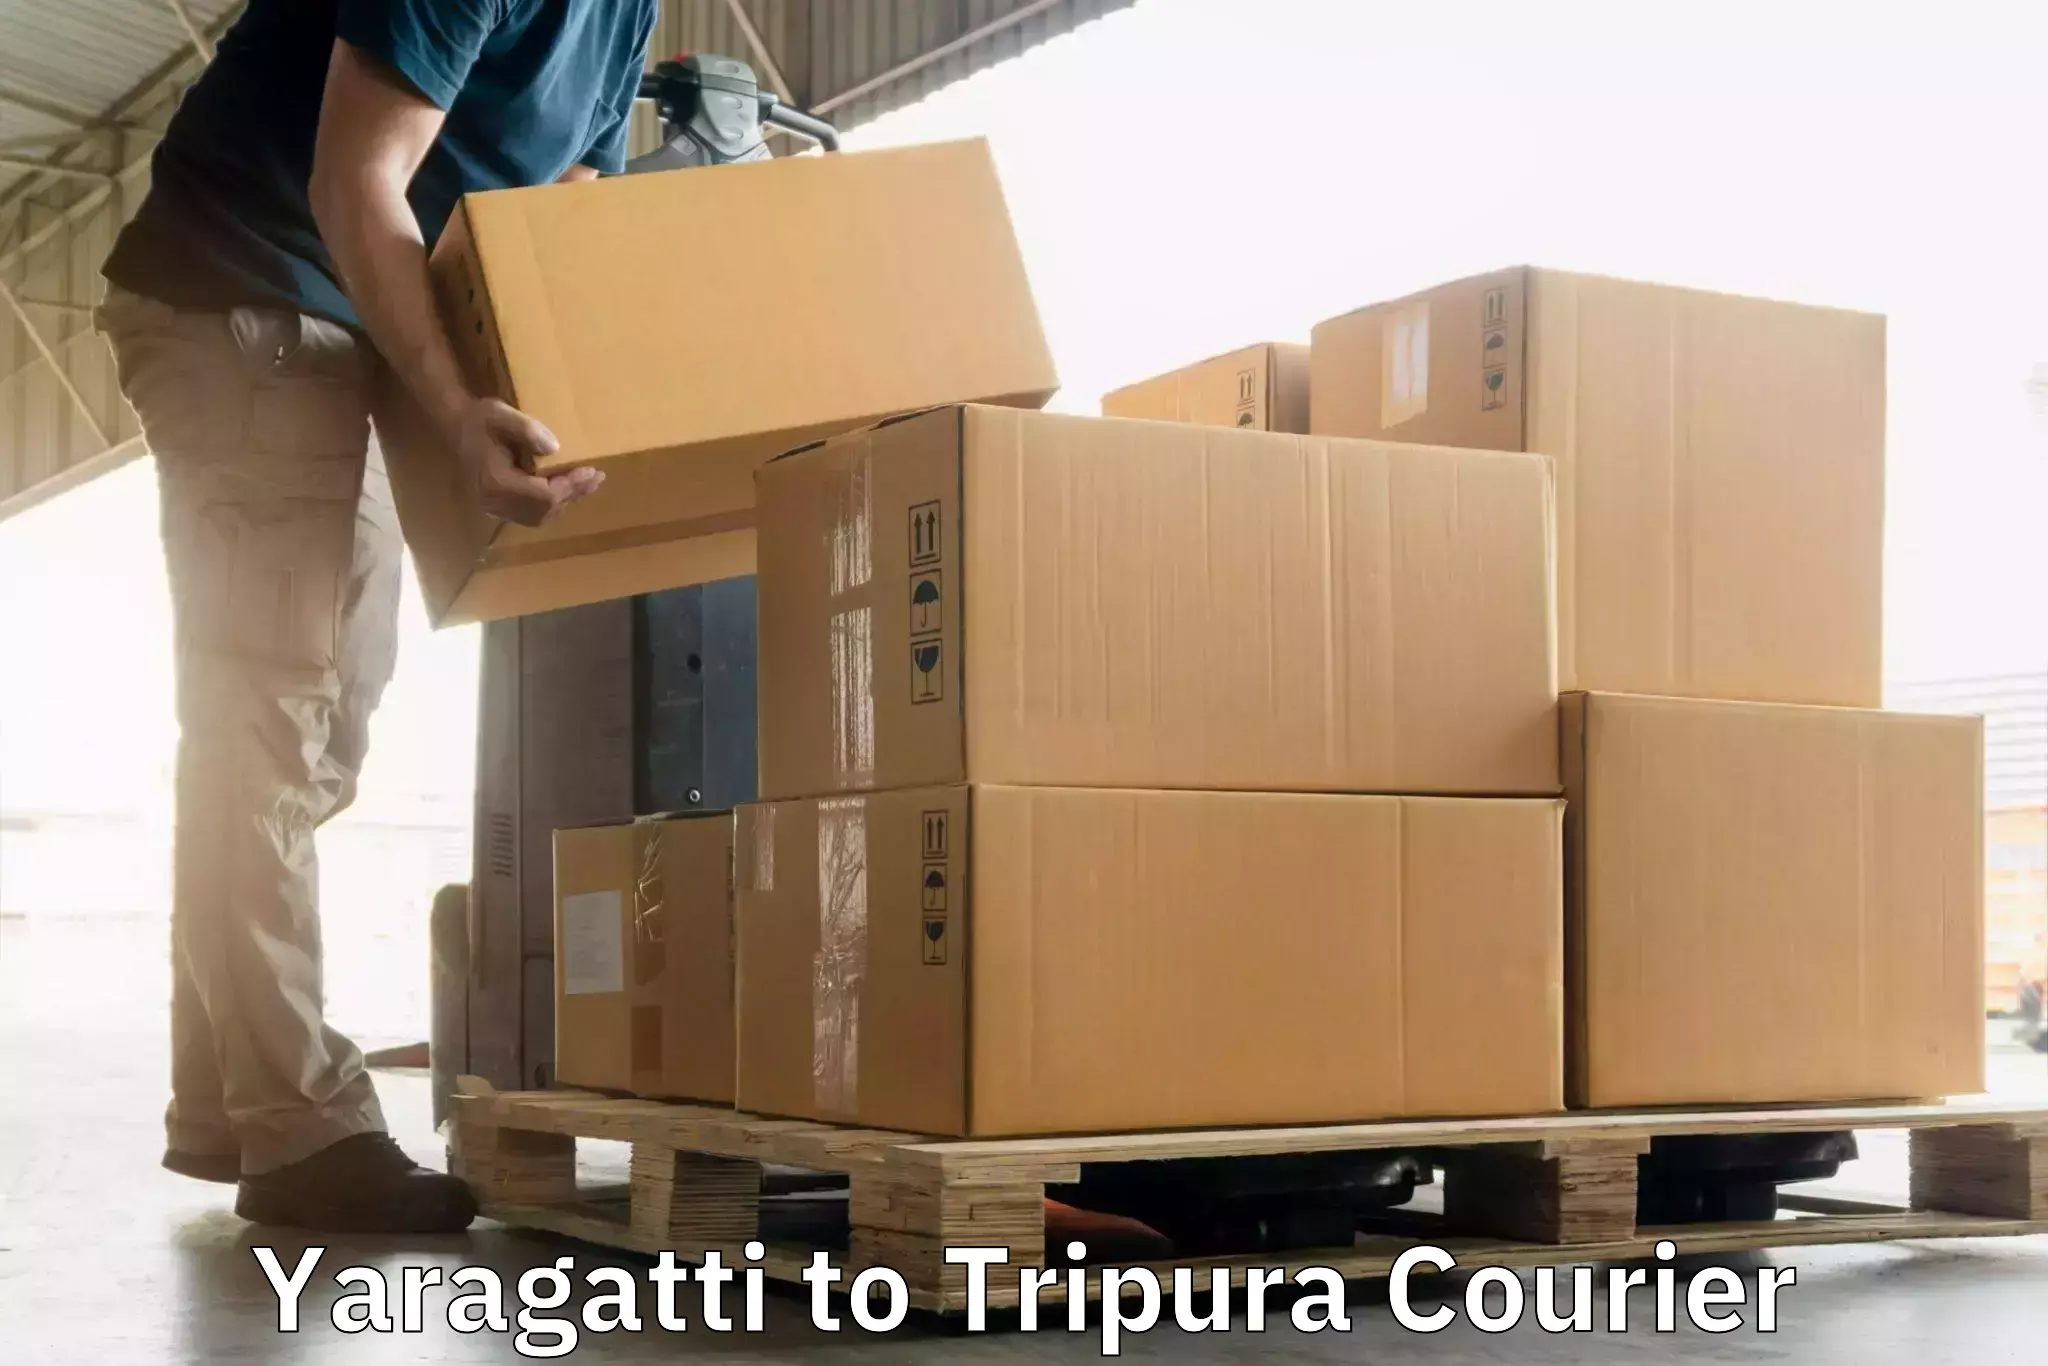 State-of-the-art courier technology Yaragatti to Amarpur Gomati